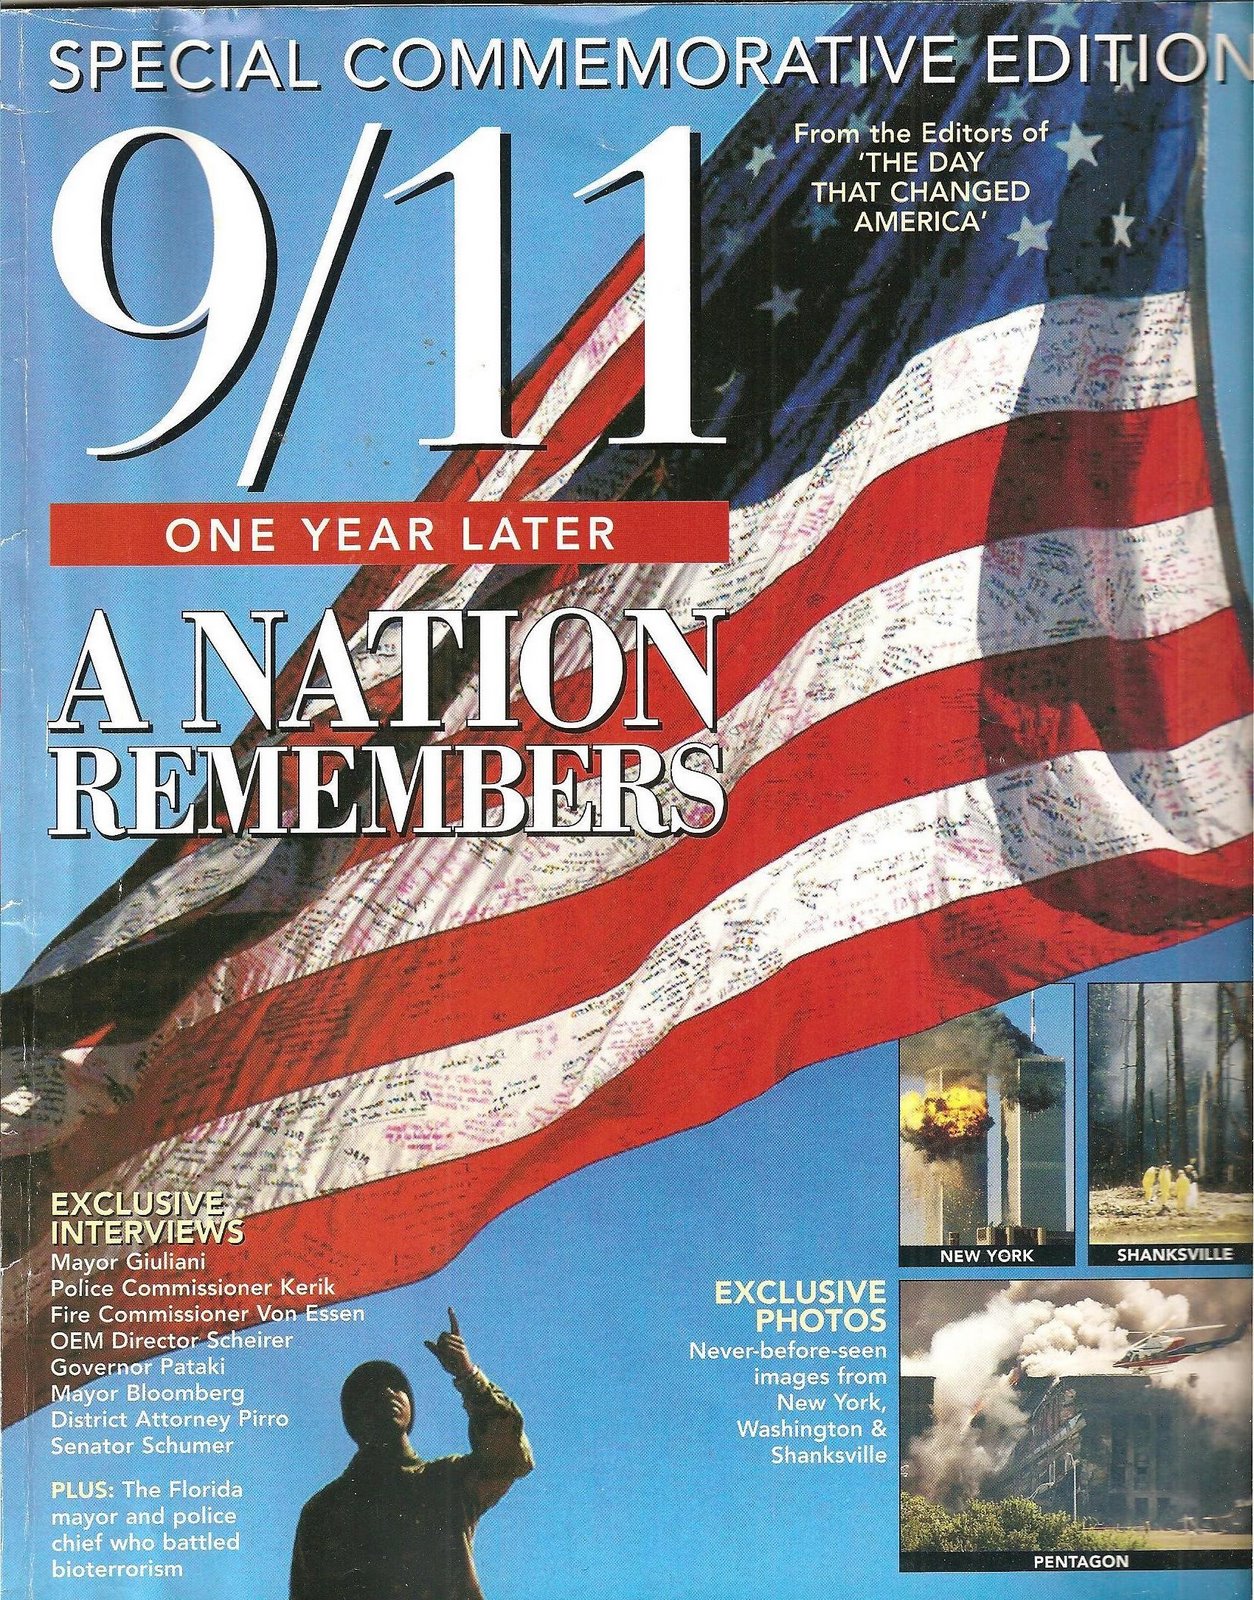 [9-11+A+Nation+Remembers+001.jpg]